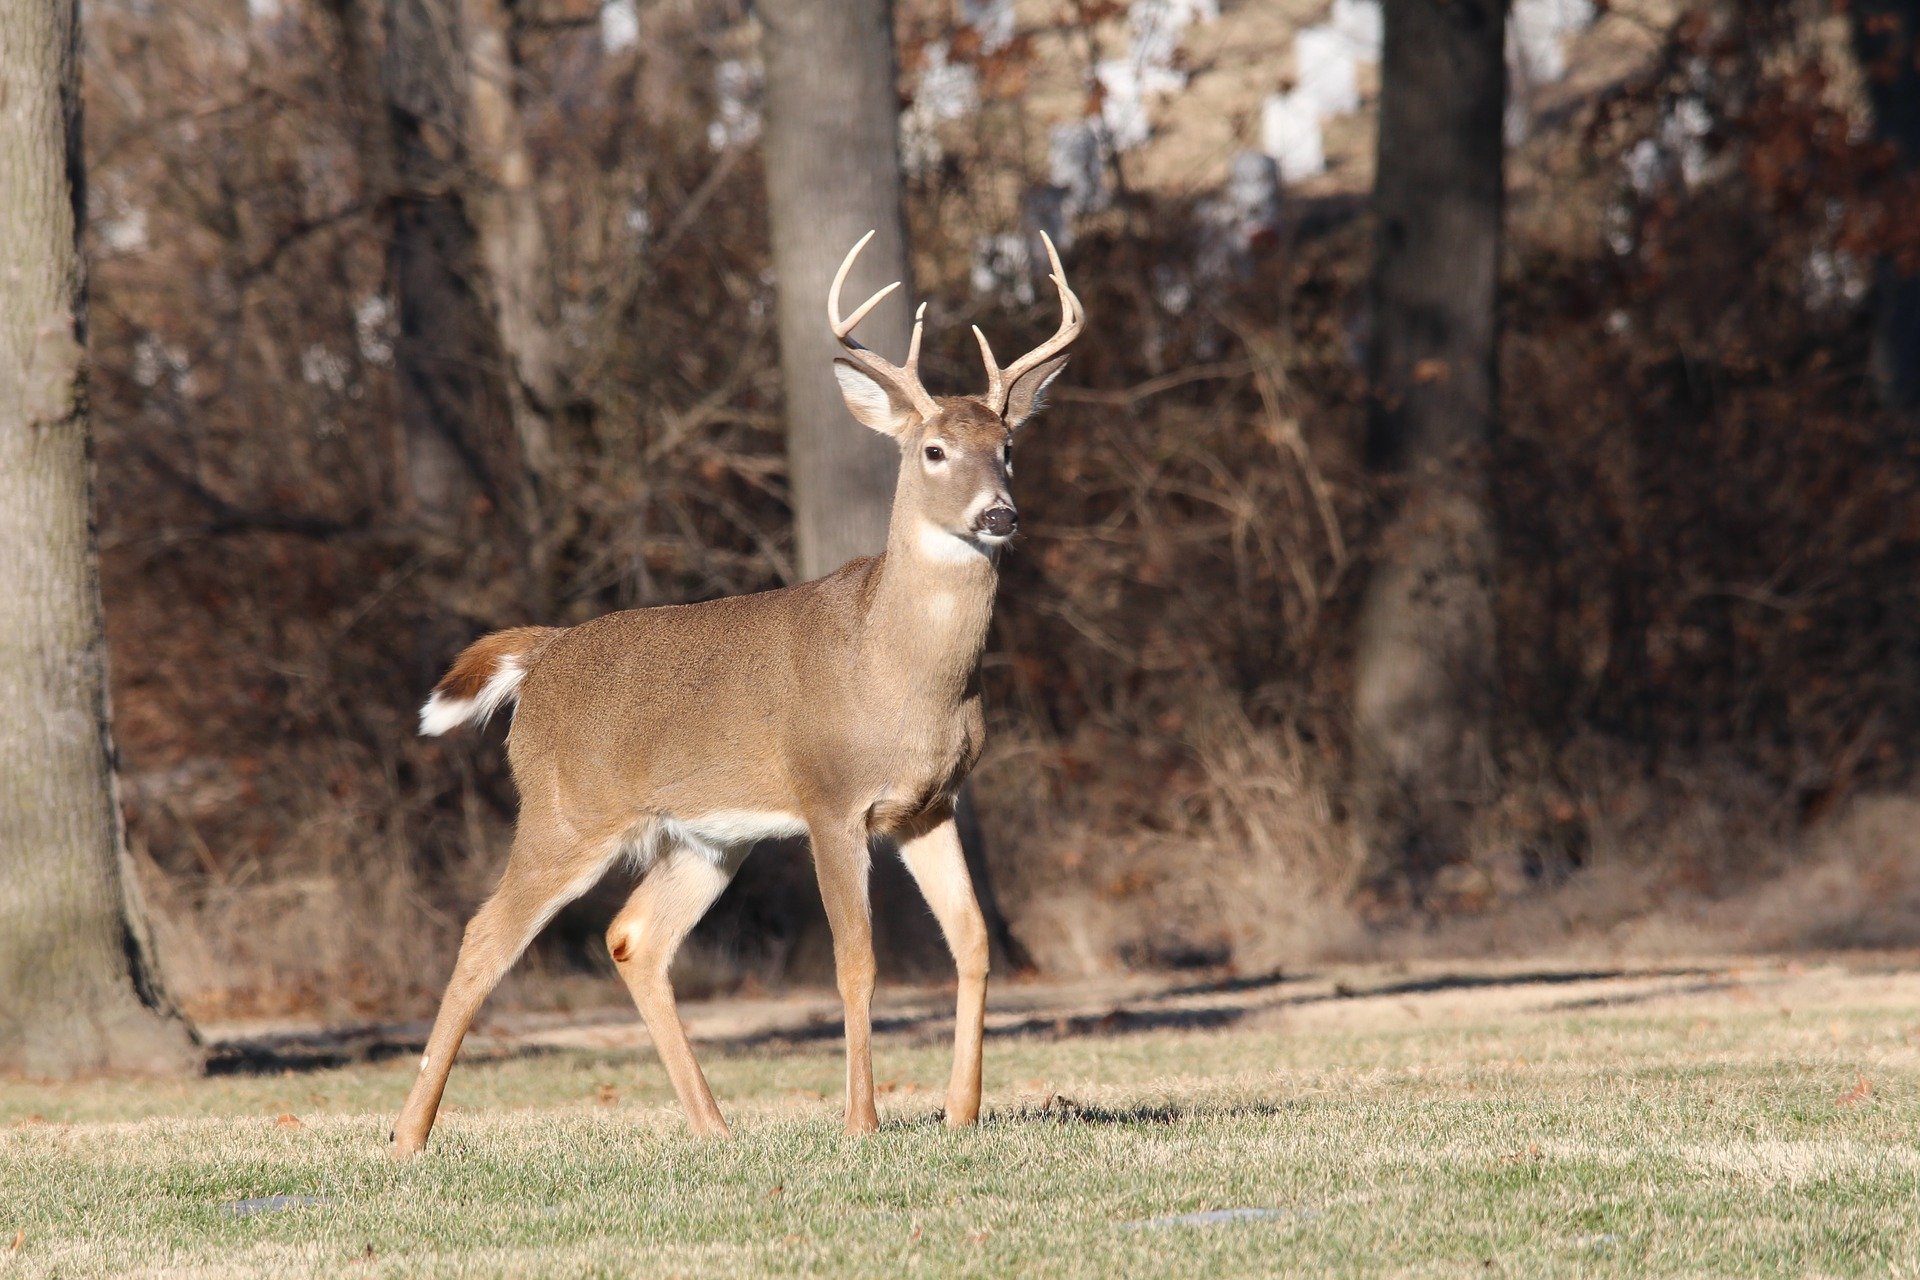 A deer culling program is now planned for a suburban Montreal park.